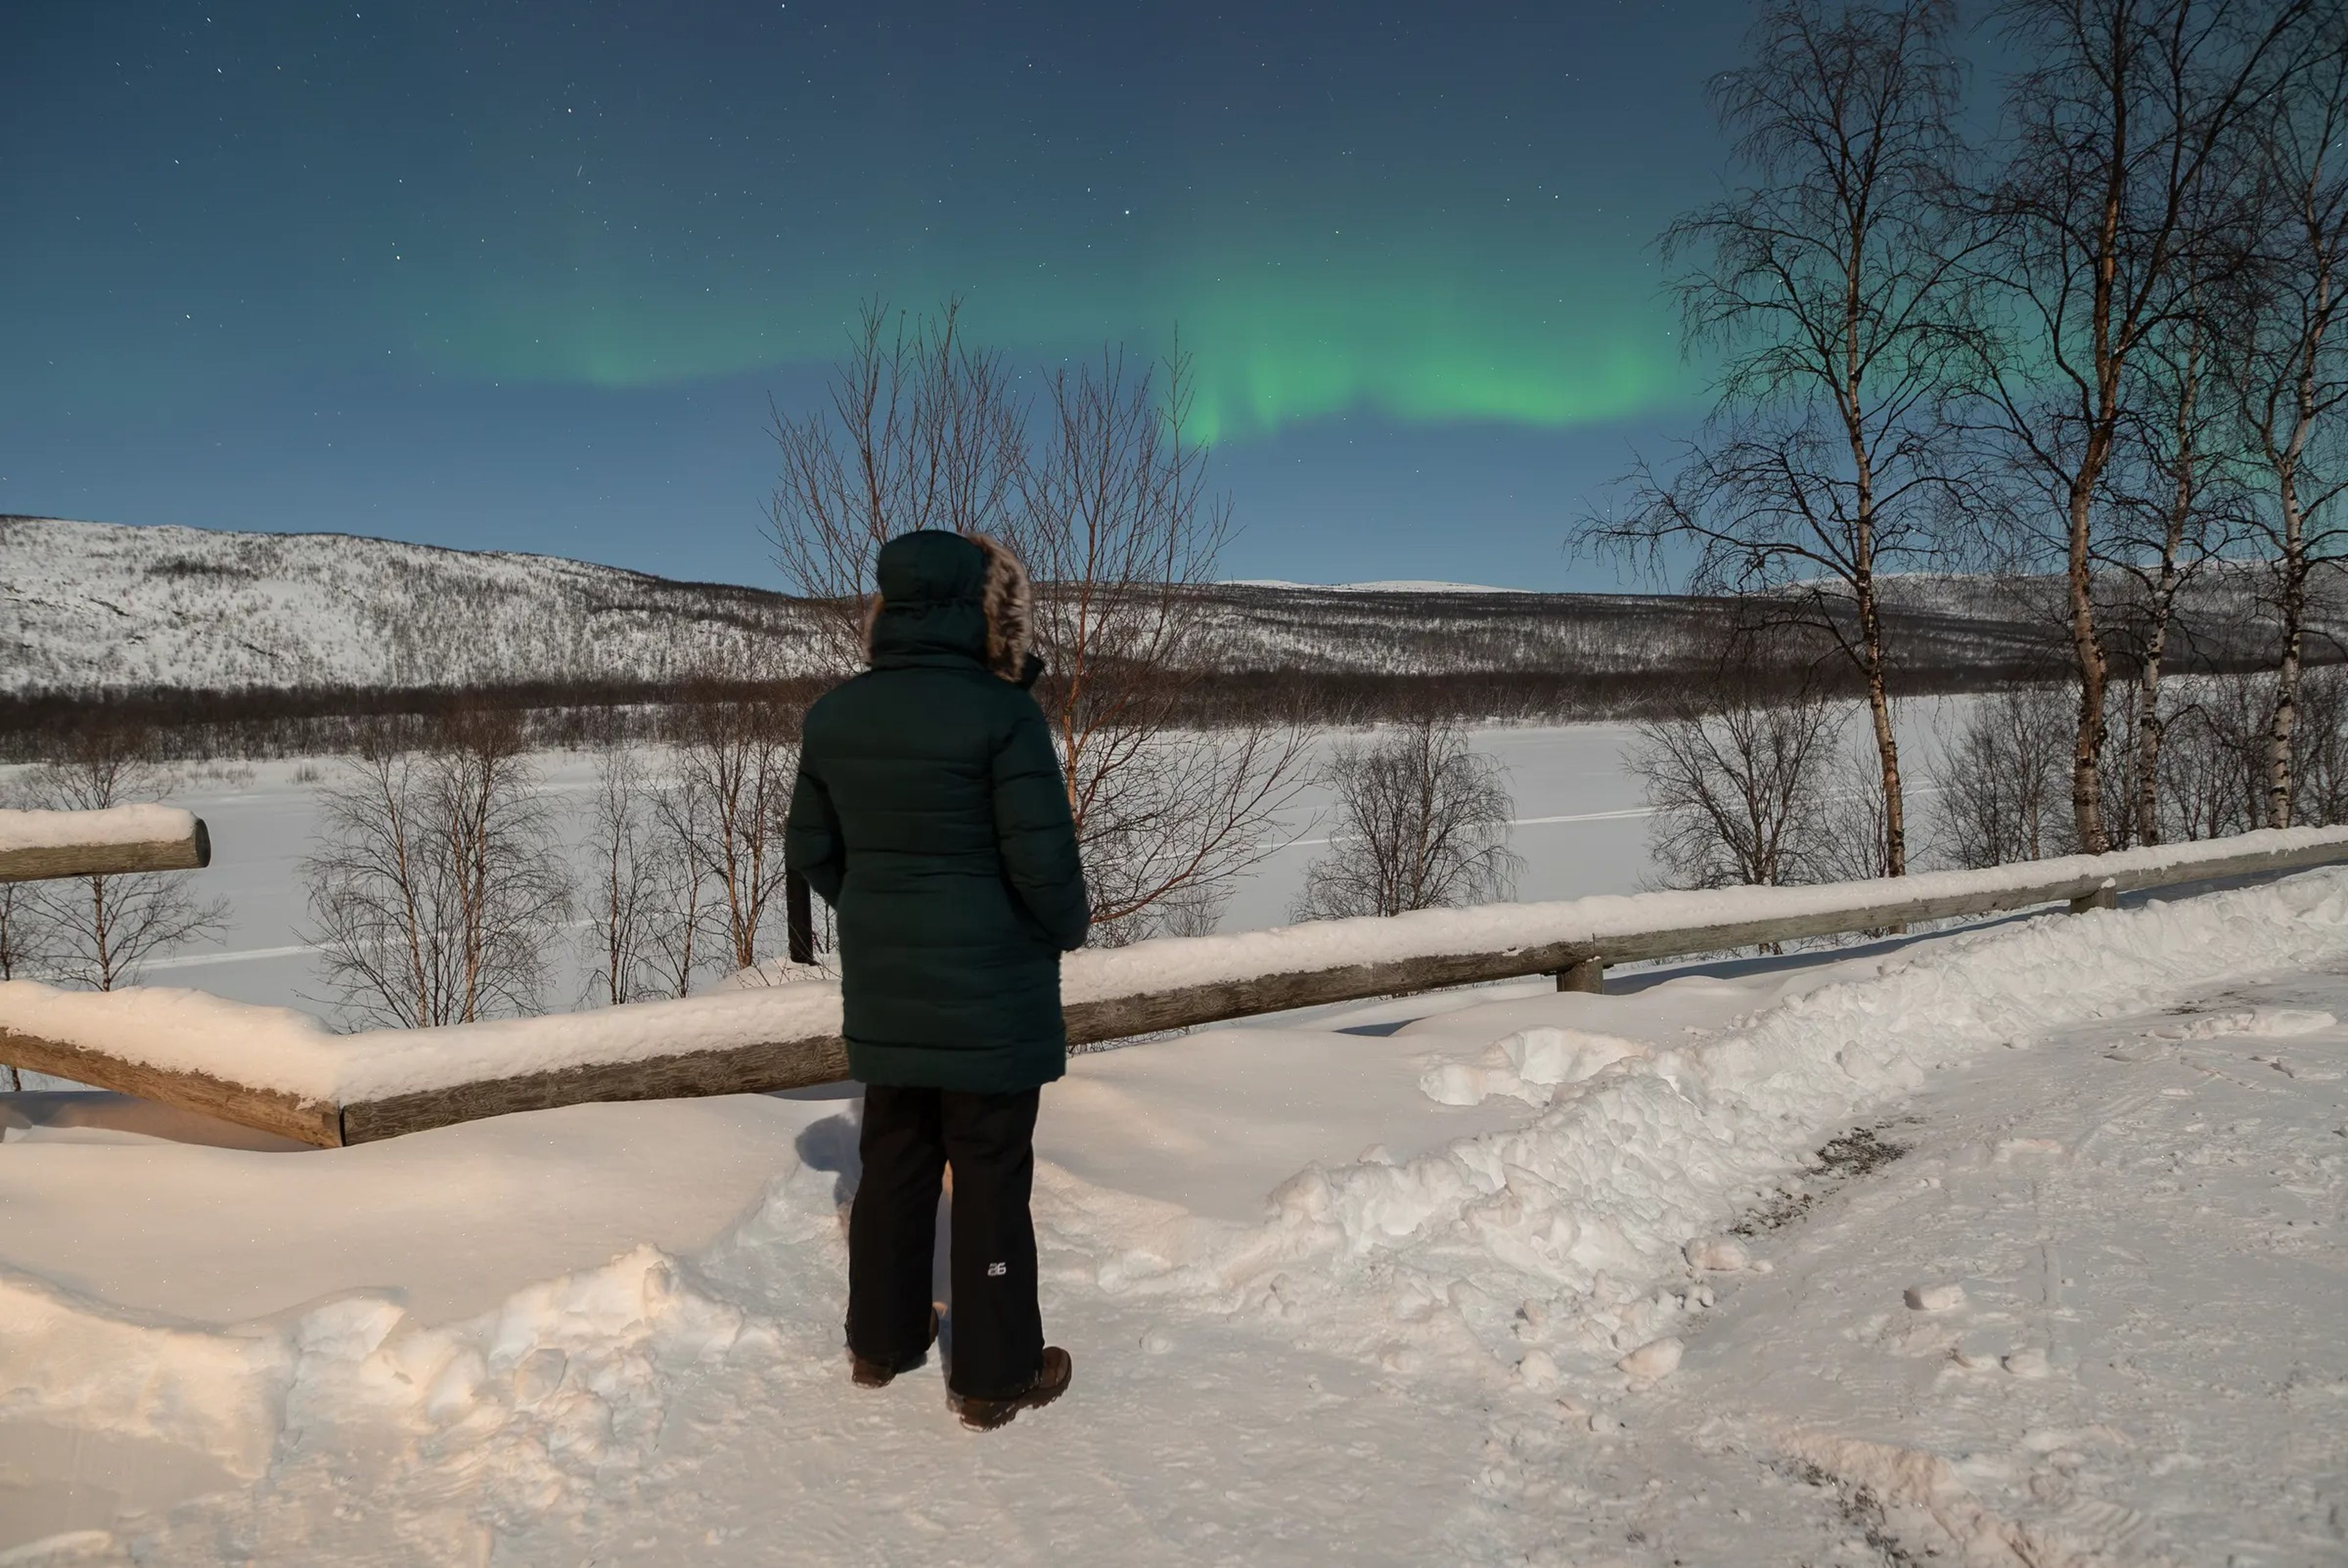 The author standing on snow looking at green northern lights over mountains.